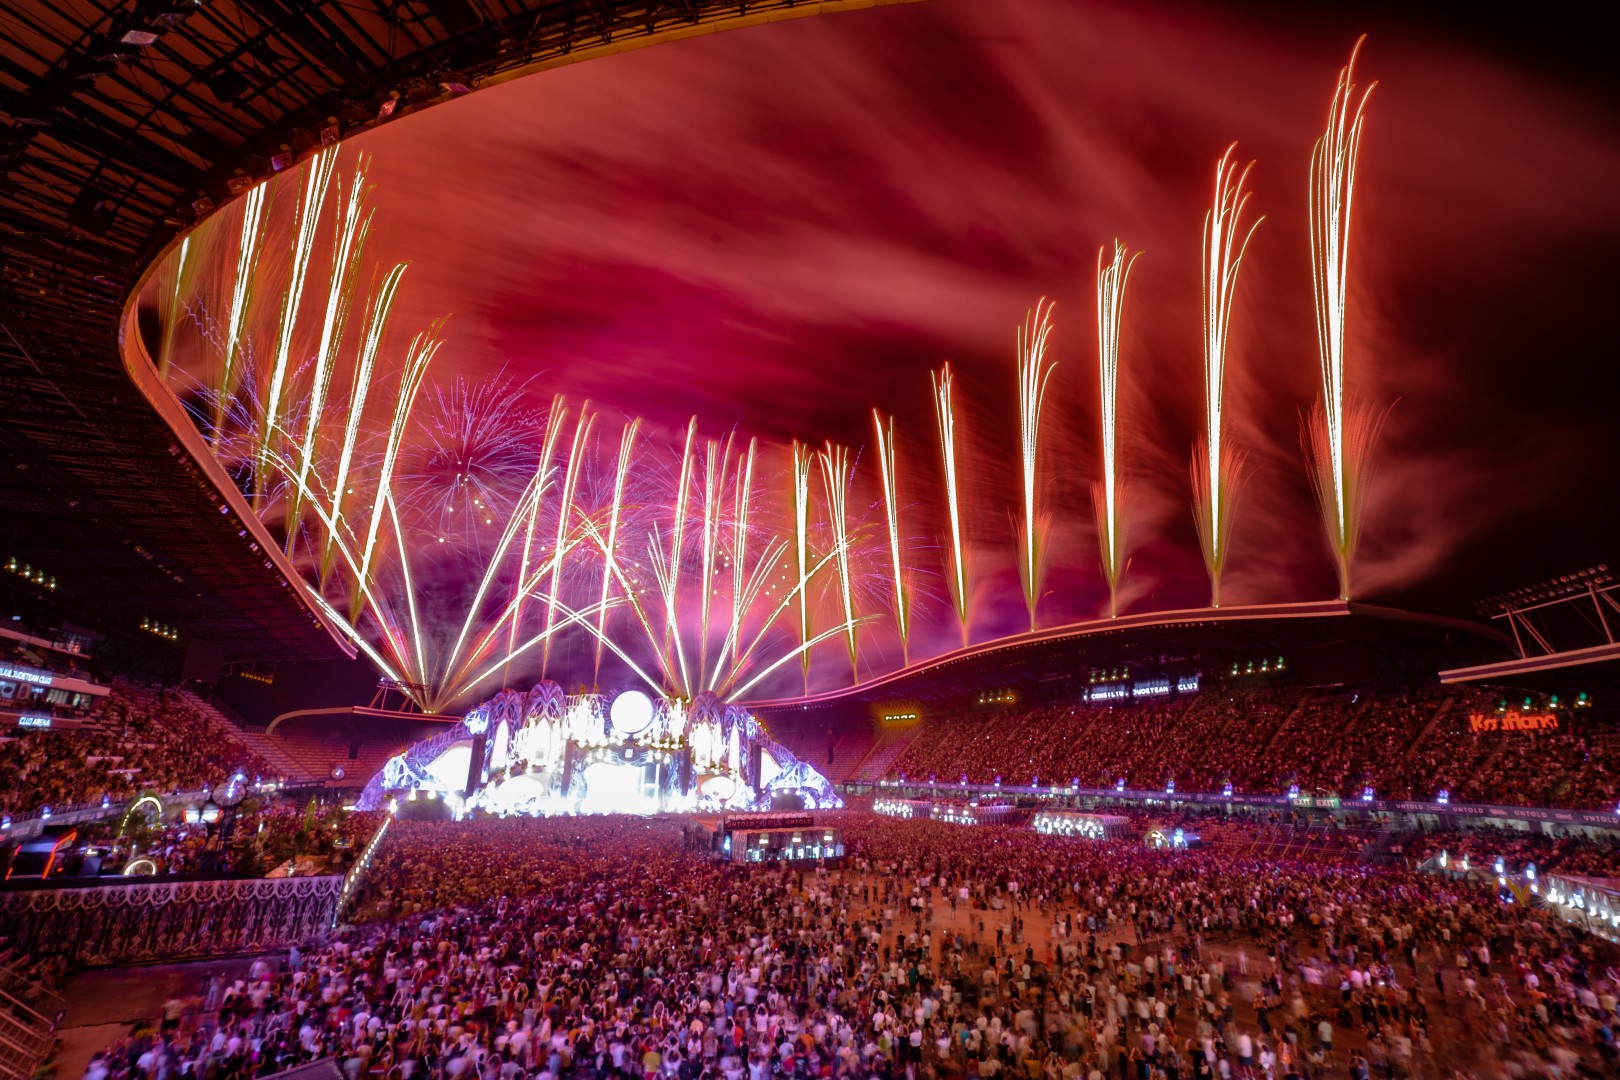 Fireworks at Cluj Arena in Cluj-Napoca on August 8, 2022 (dfd721942d)